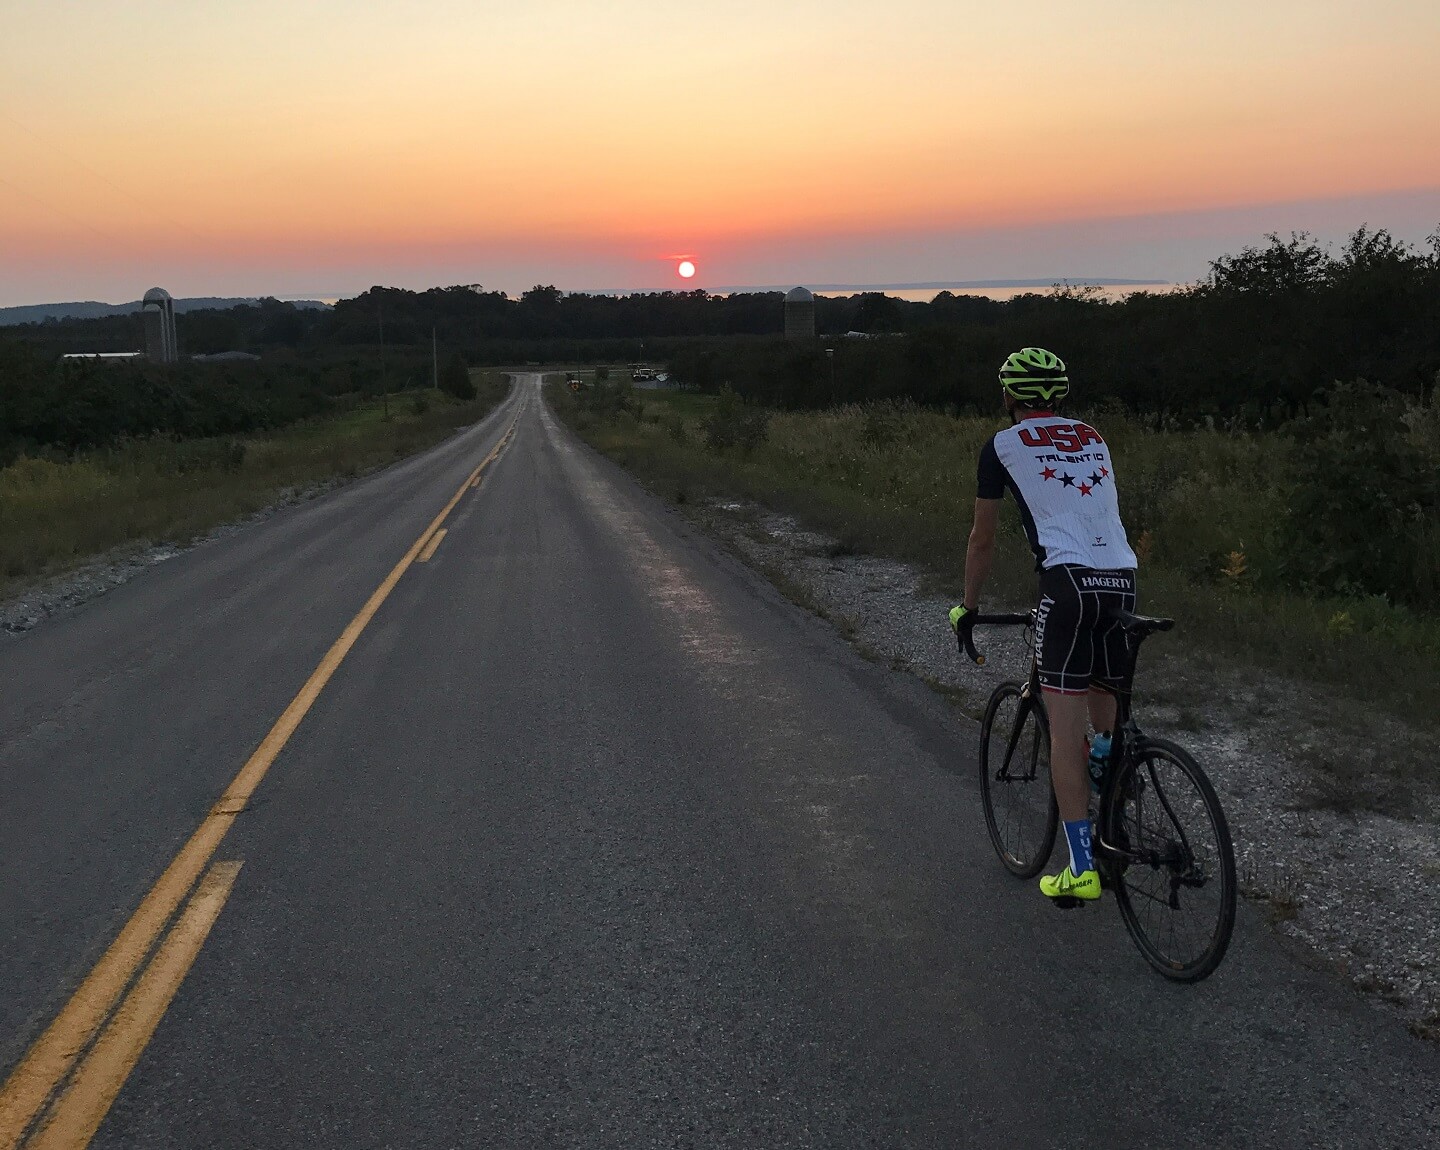 Young man on bicycle faces open road, sunset on horizon